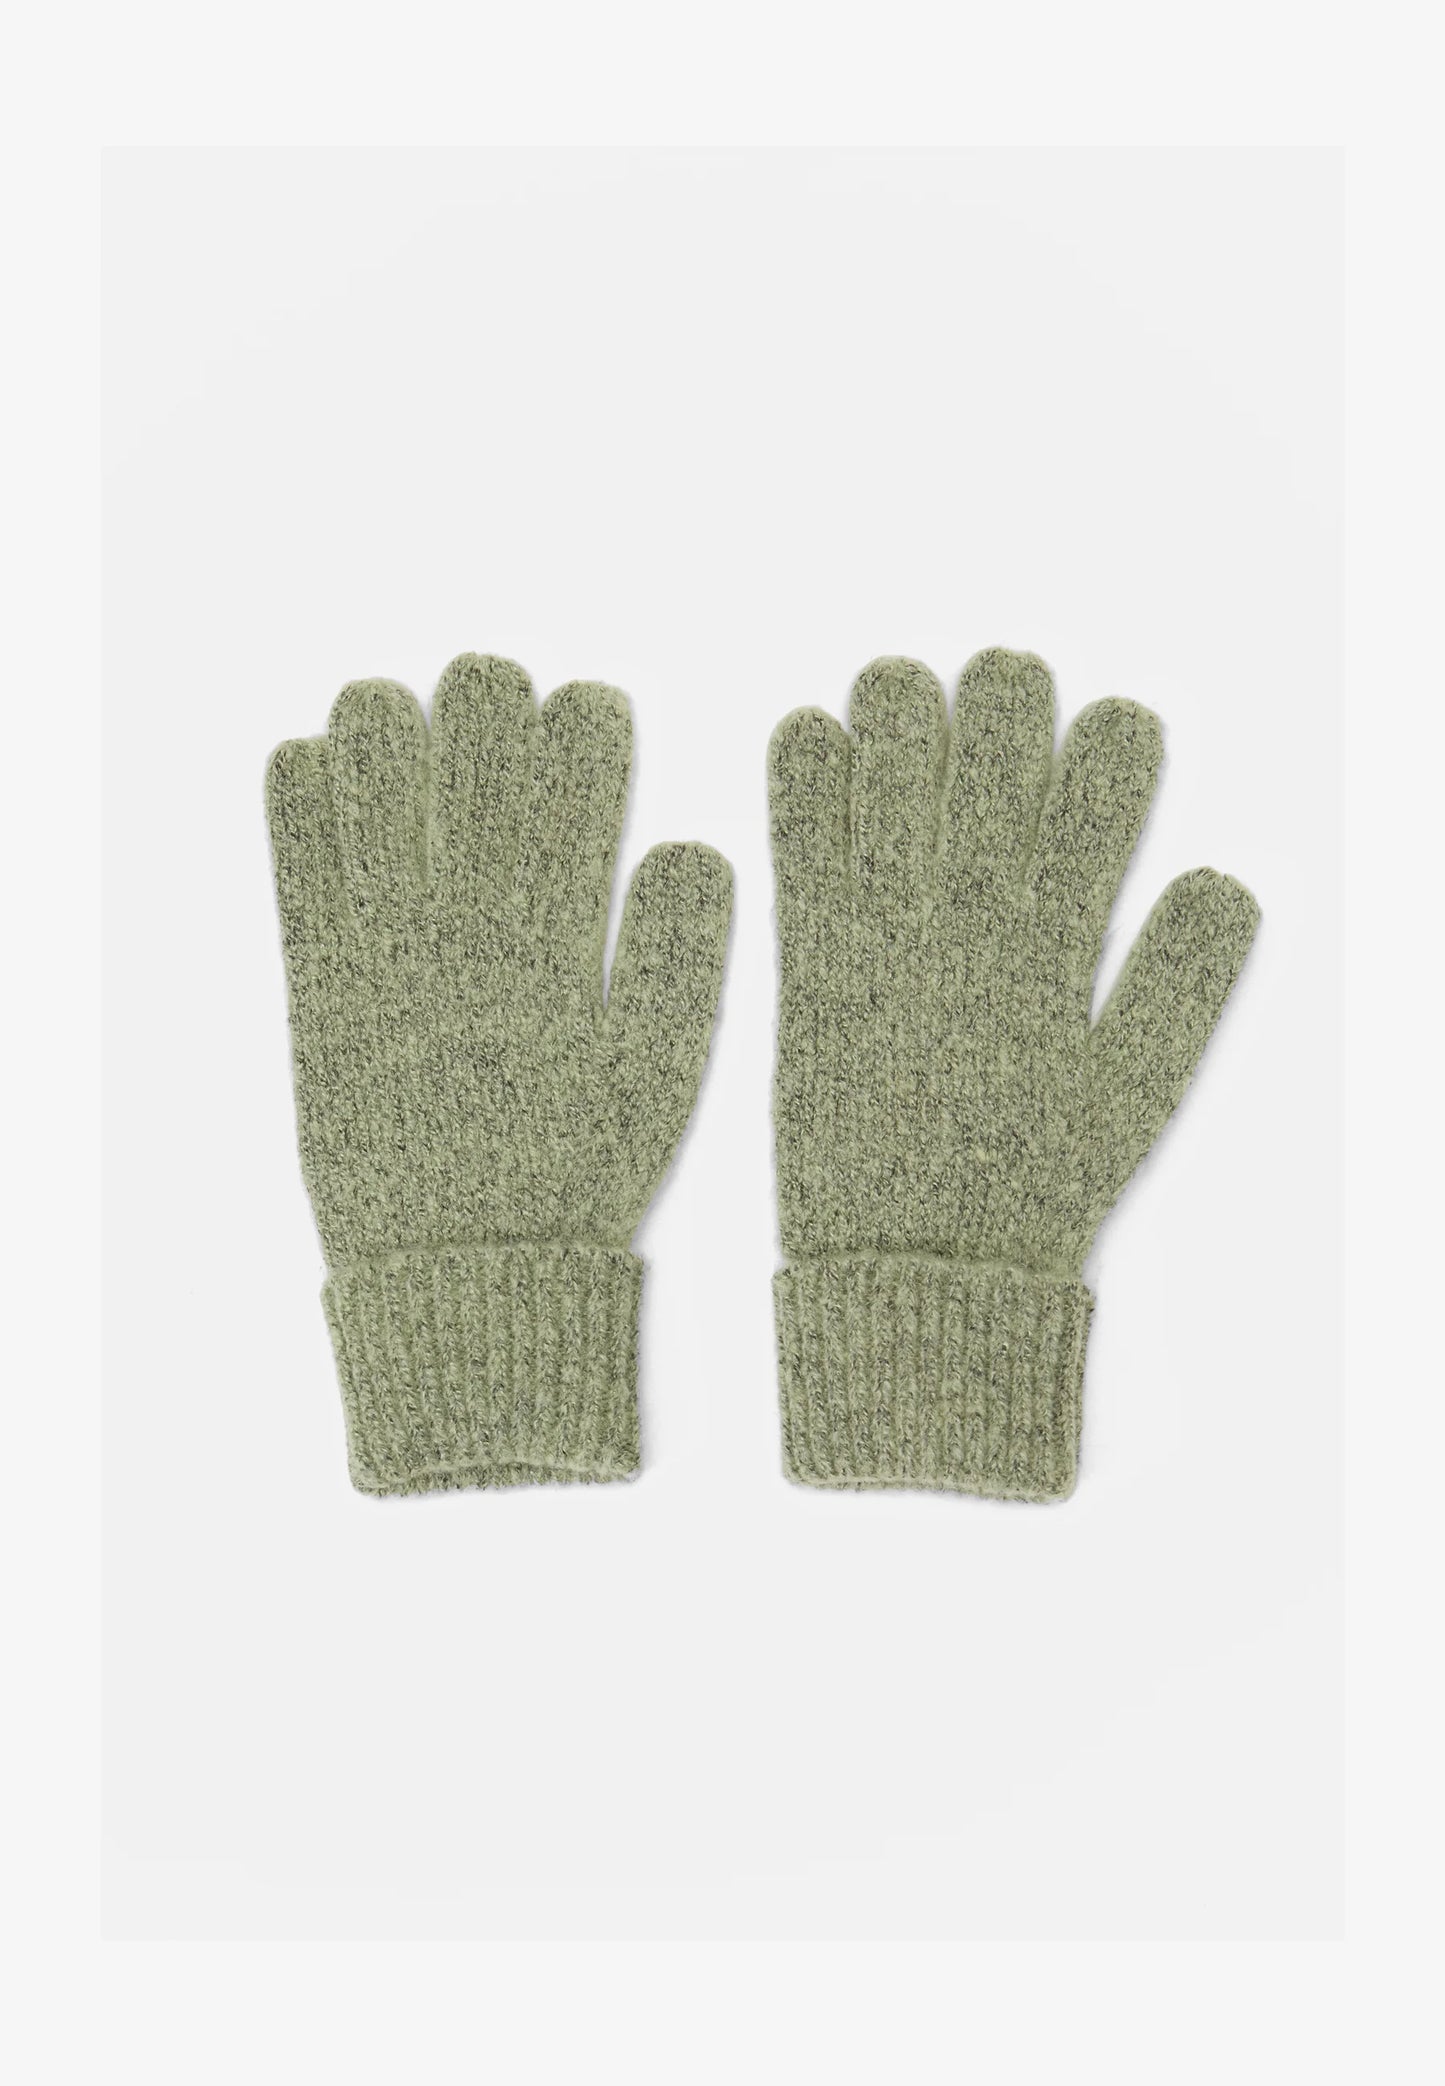 Pieces Knitted Gloves - Swamp or Kentucky Blue